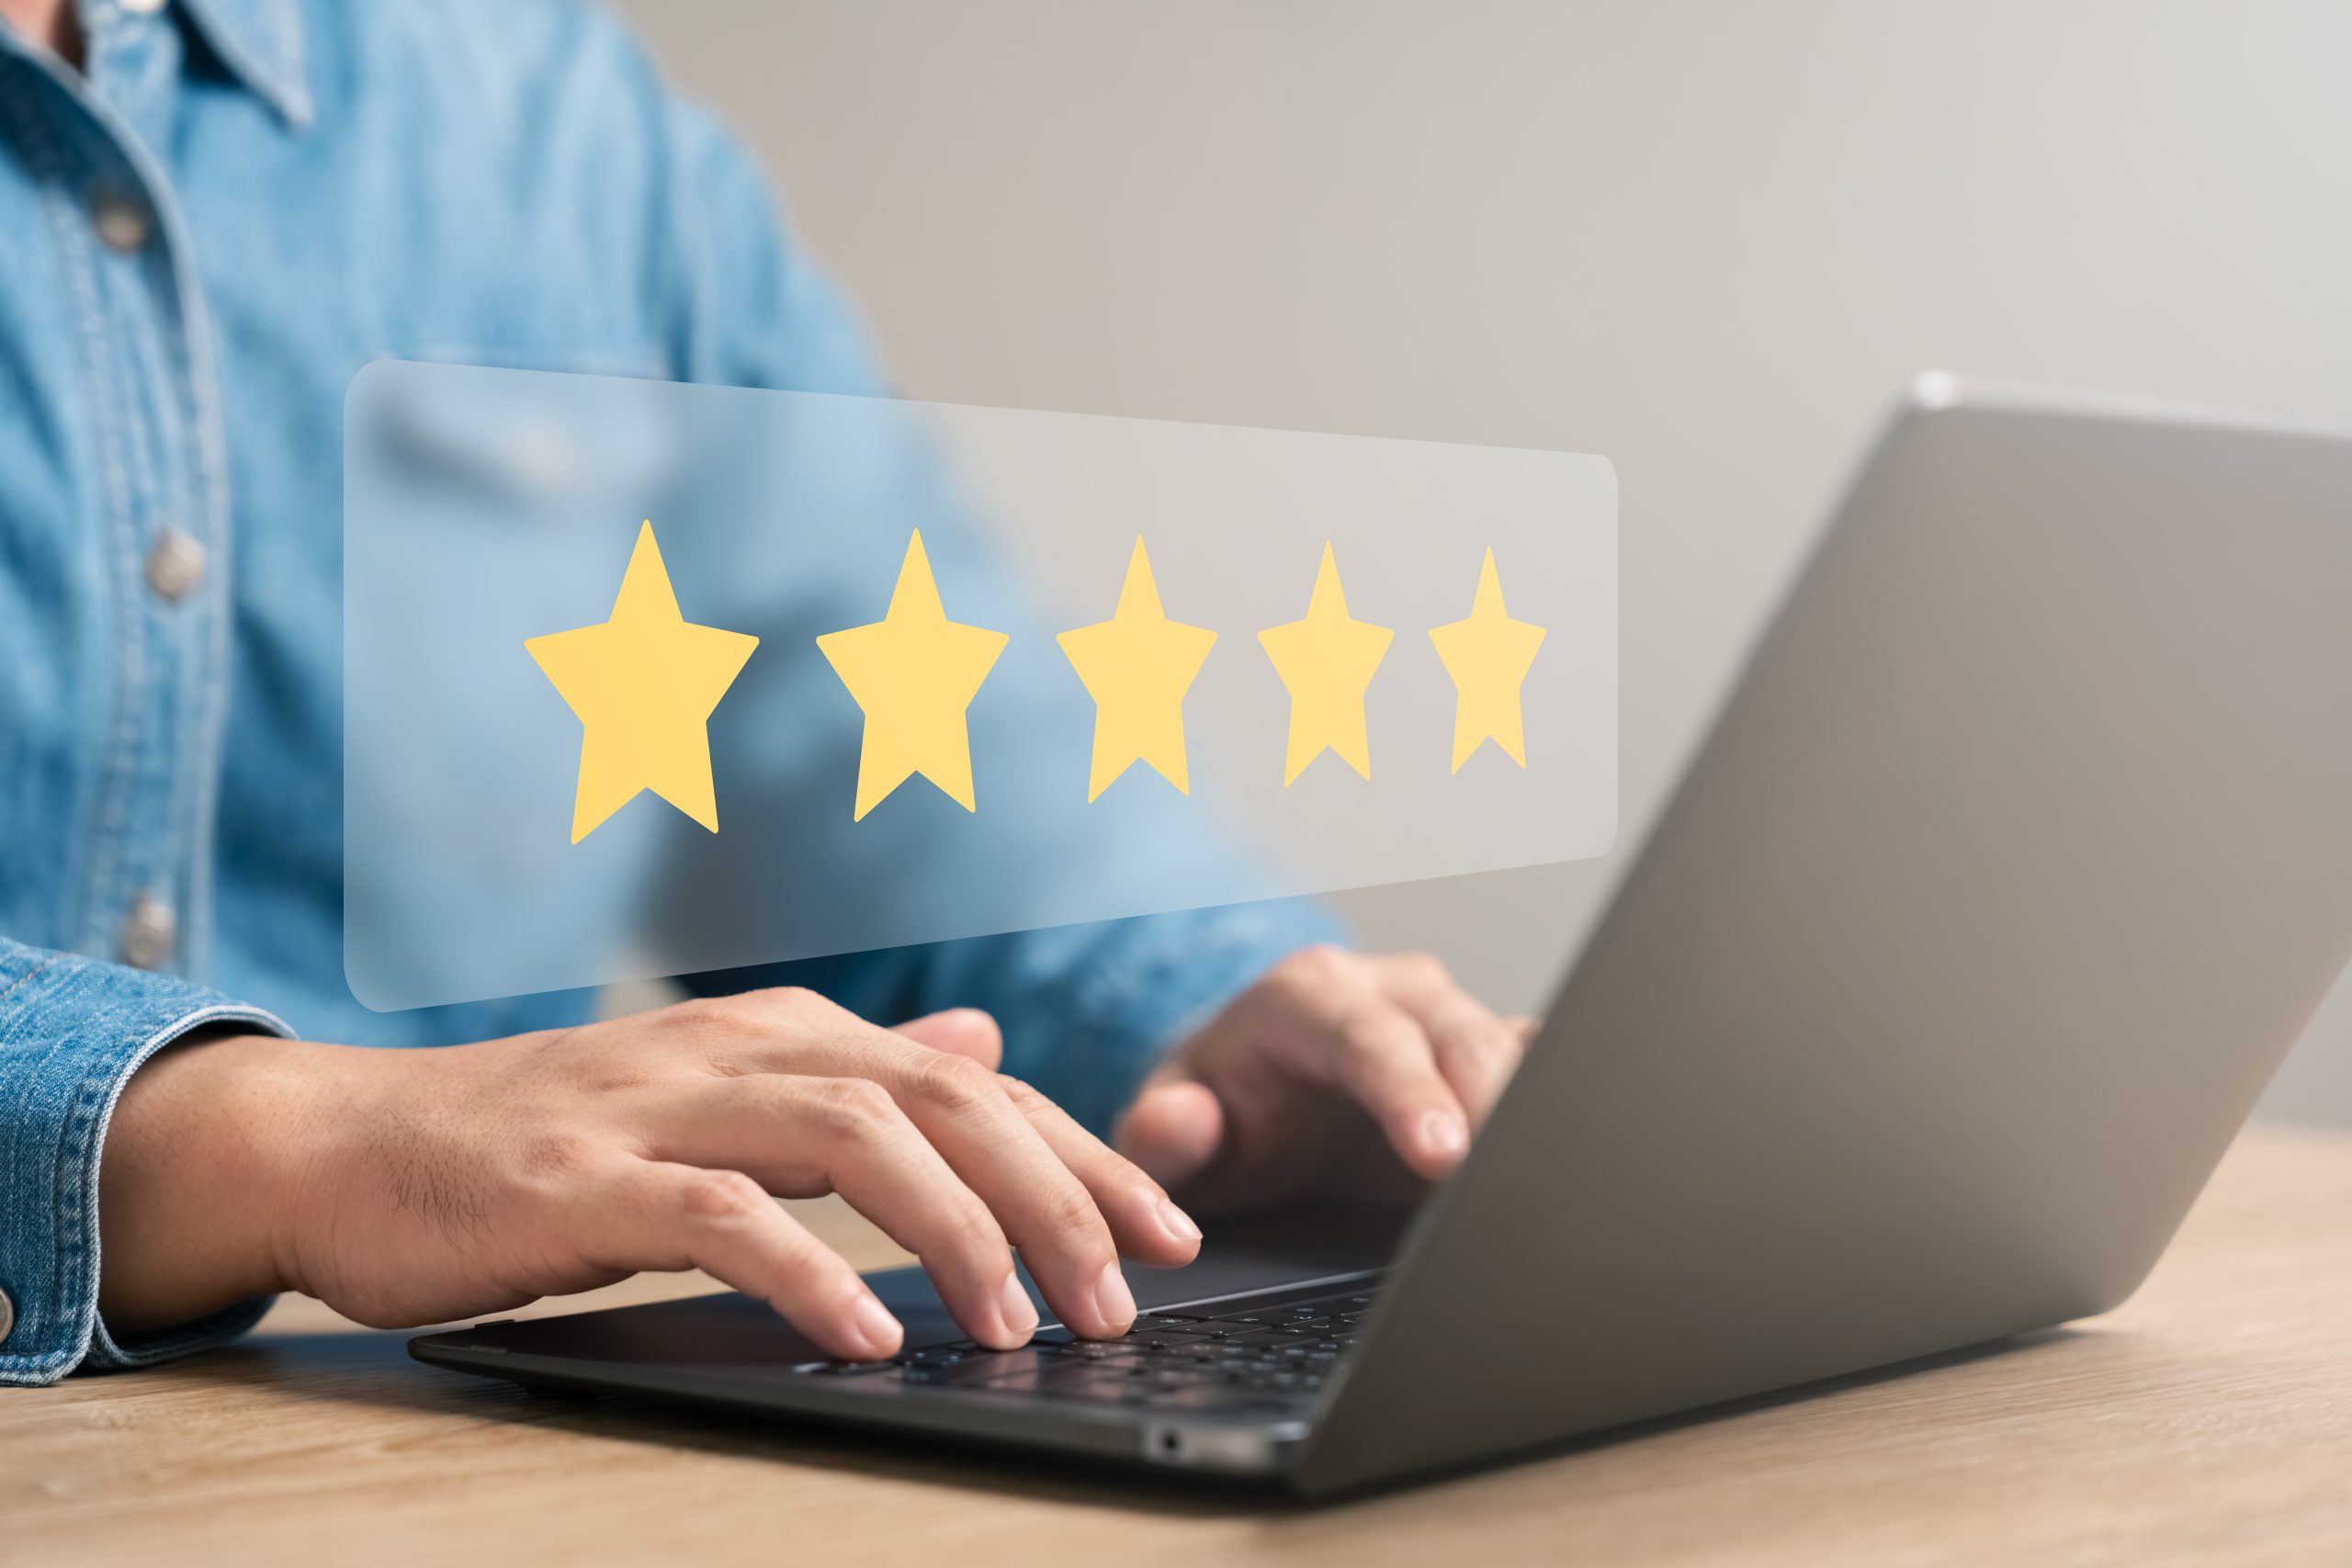 customer satisfaction survey concept business people use laptops Touch the happy smiley icon. Satisfied. 5 stars. Service experience rating. online application Satisfaction Review best quality.